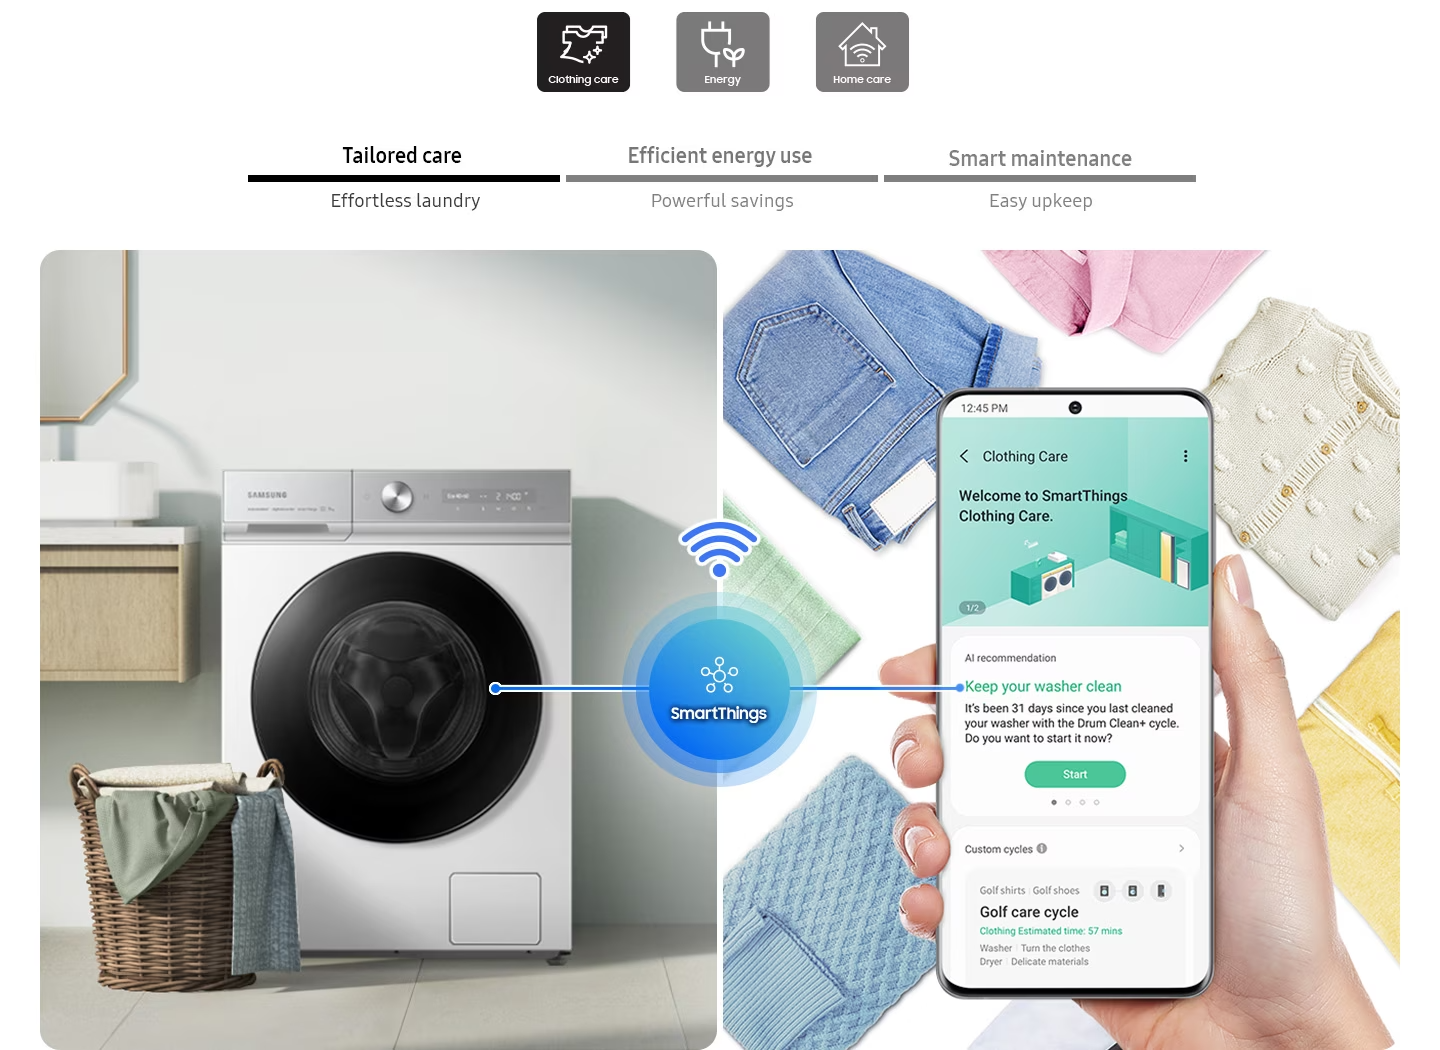 Description: The SmartThings app helps Tailored care, Efficient energy use, Smart maintenance. Clothing Care displays AI recommendations for effortless laundry, Energy notifies best rates based on personal usage for powerful saving, Home Care helps easy upkeep the washing machine maintenance.